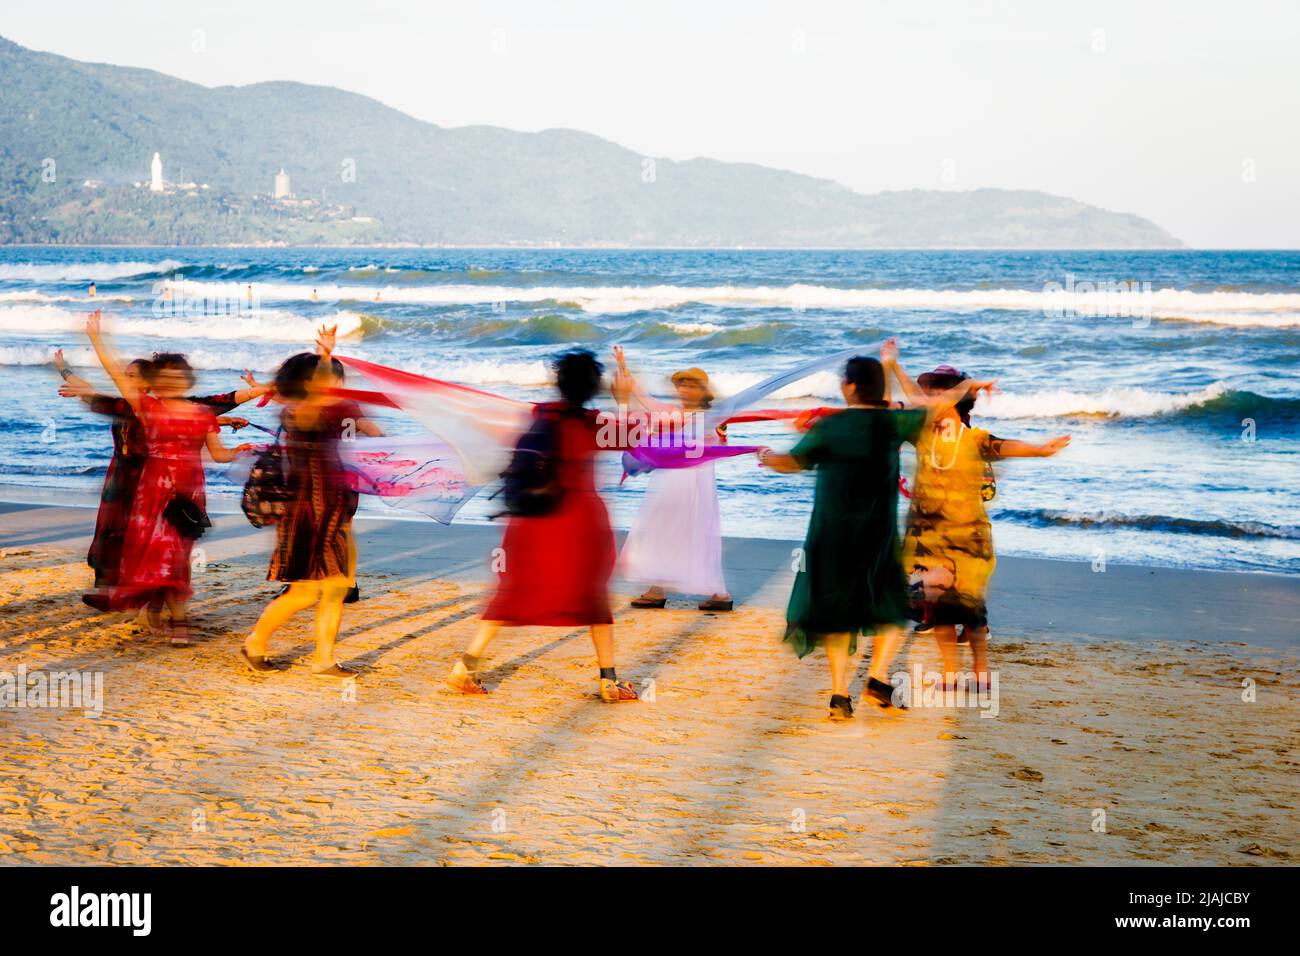 Motion blur of a group of Asian women dancing in a circle on the beach at Da nang, VN. Hua Linh Ung statue in background on mountain. Stock Photo